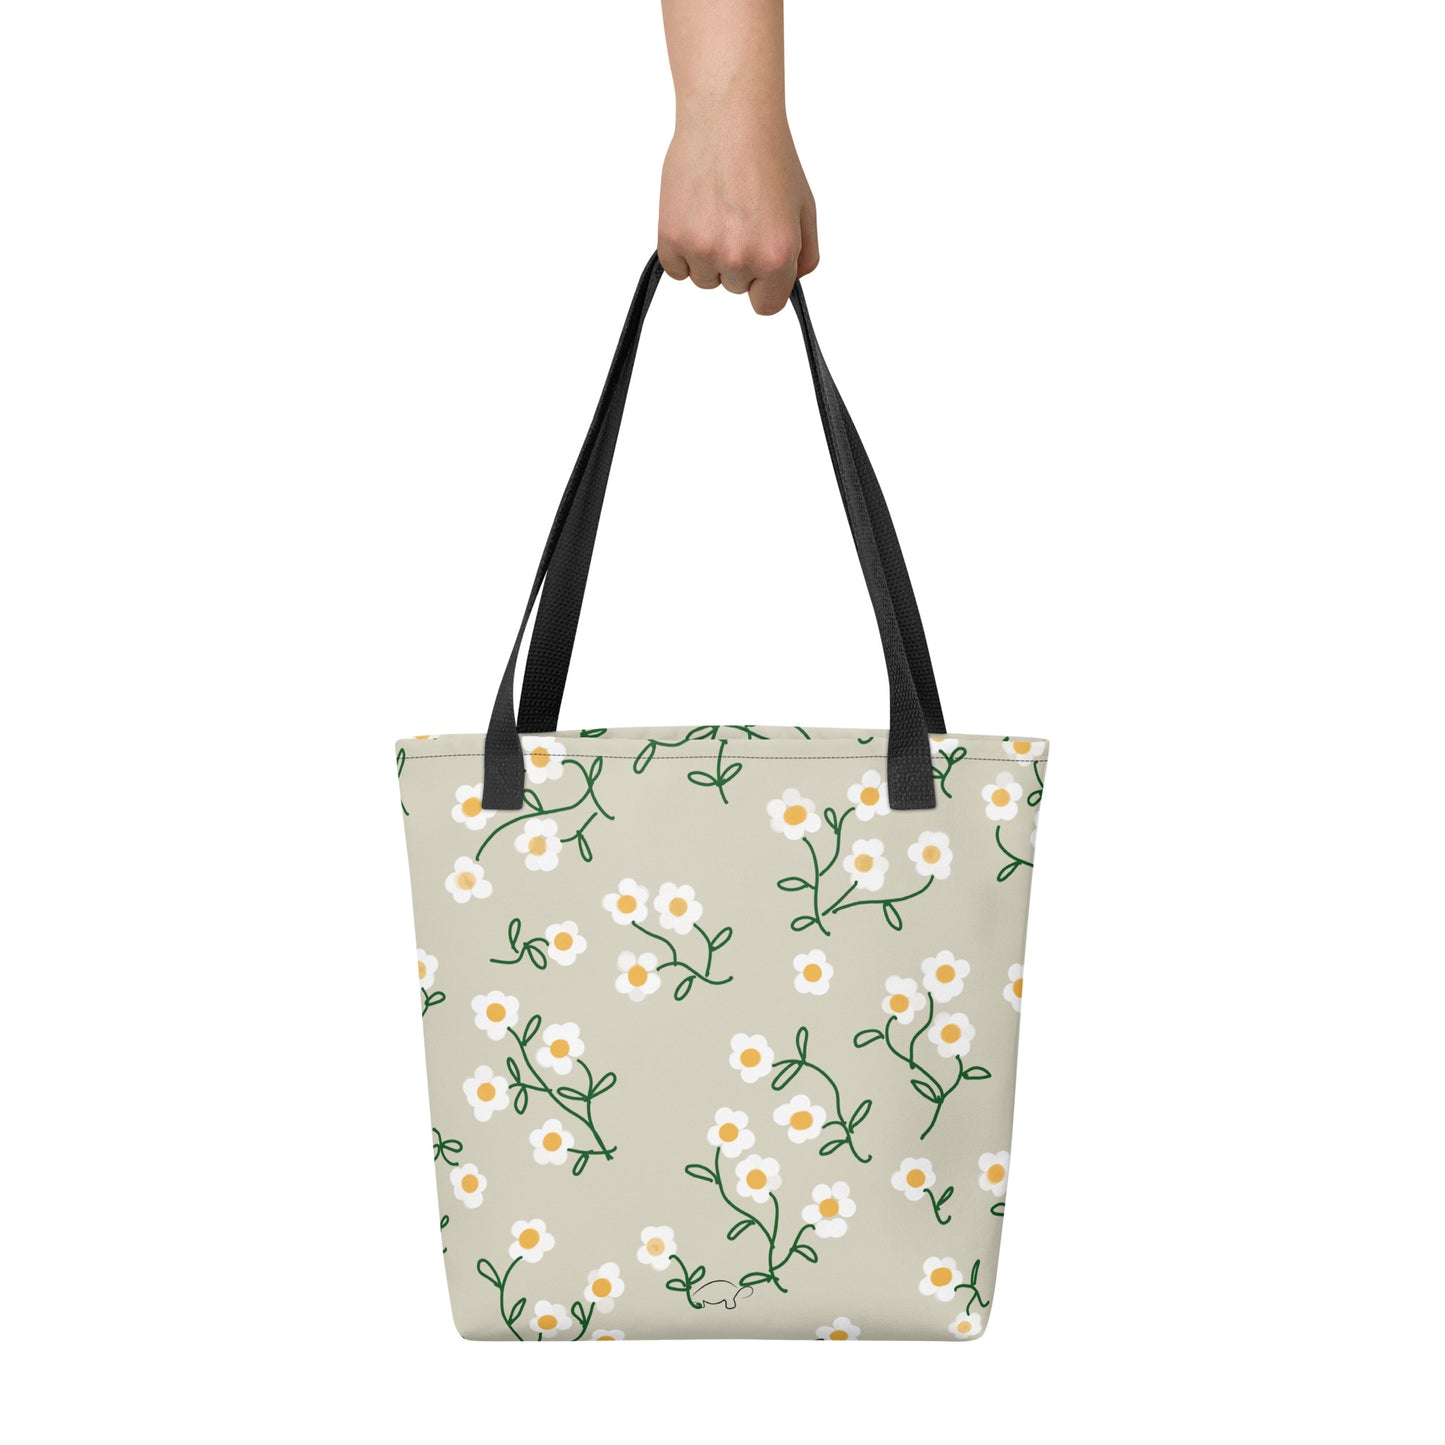 Super Bloom Collection Beige Margaritas Tote bag. Pattern hand-painted by the Designer Maria Alejandra Echenique